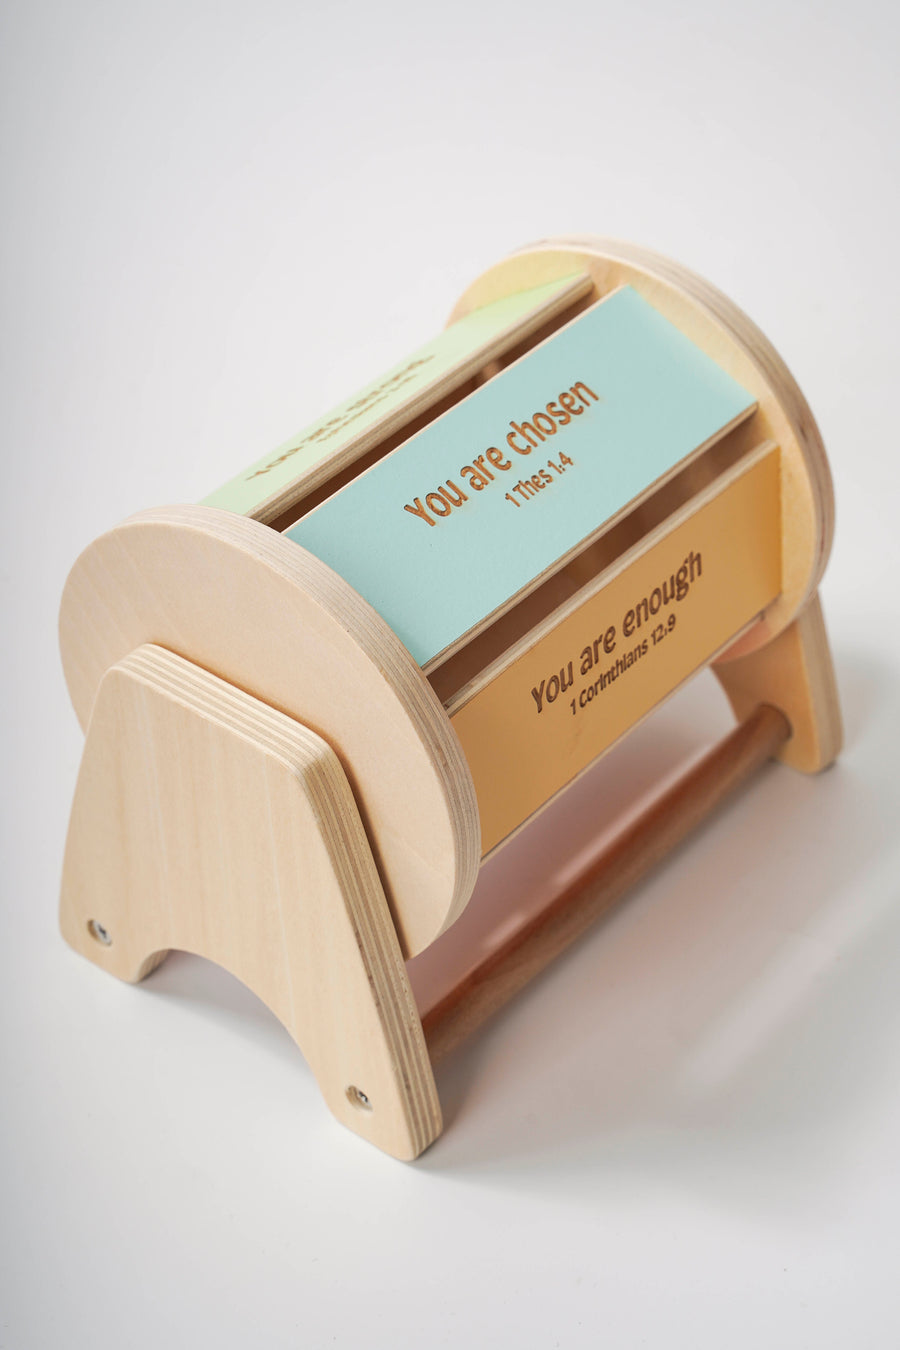 Montessori inspired wooden spinning drum where each panel on the drum features an affirmation bible verse. 'You are chosen' is pictured.